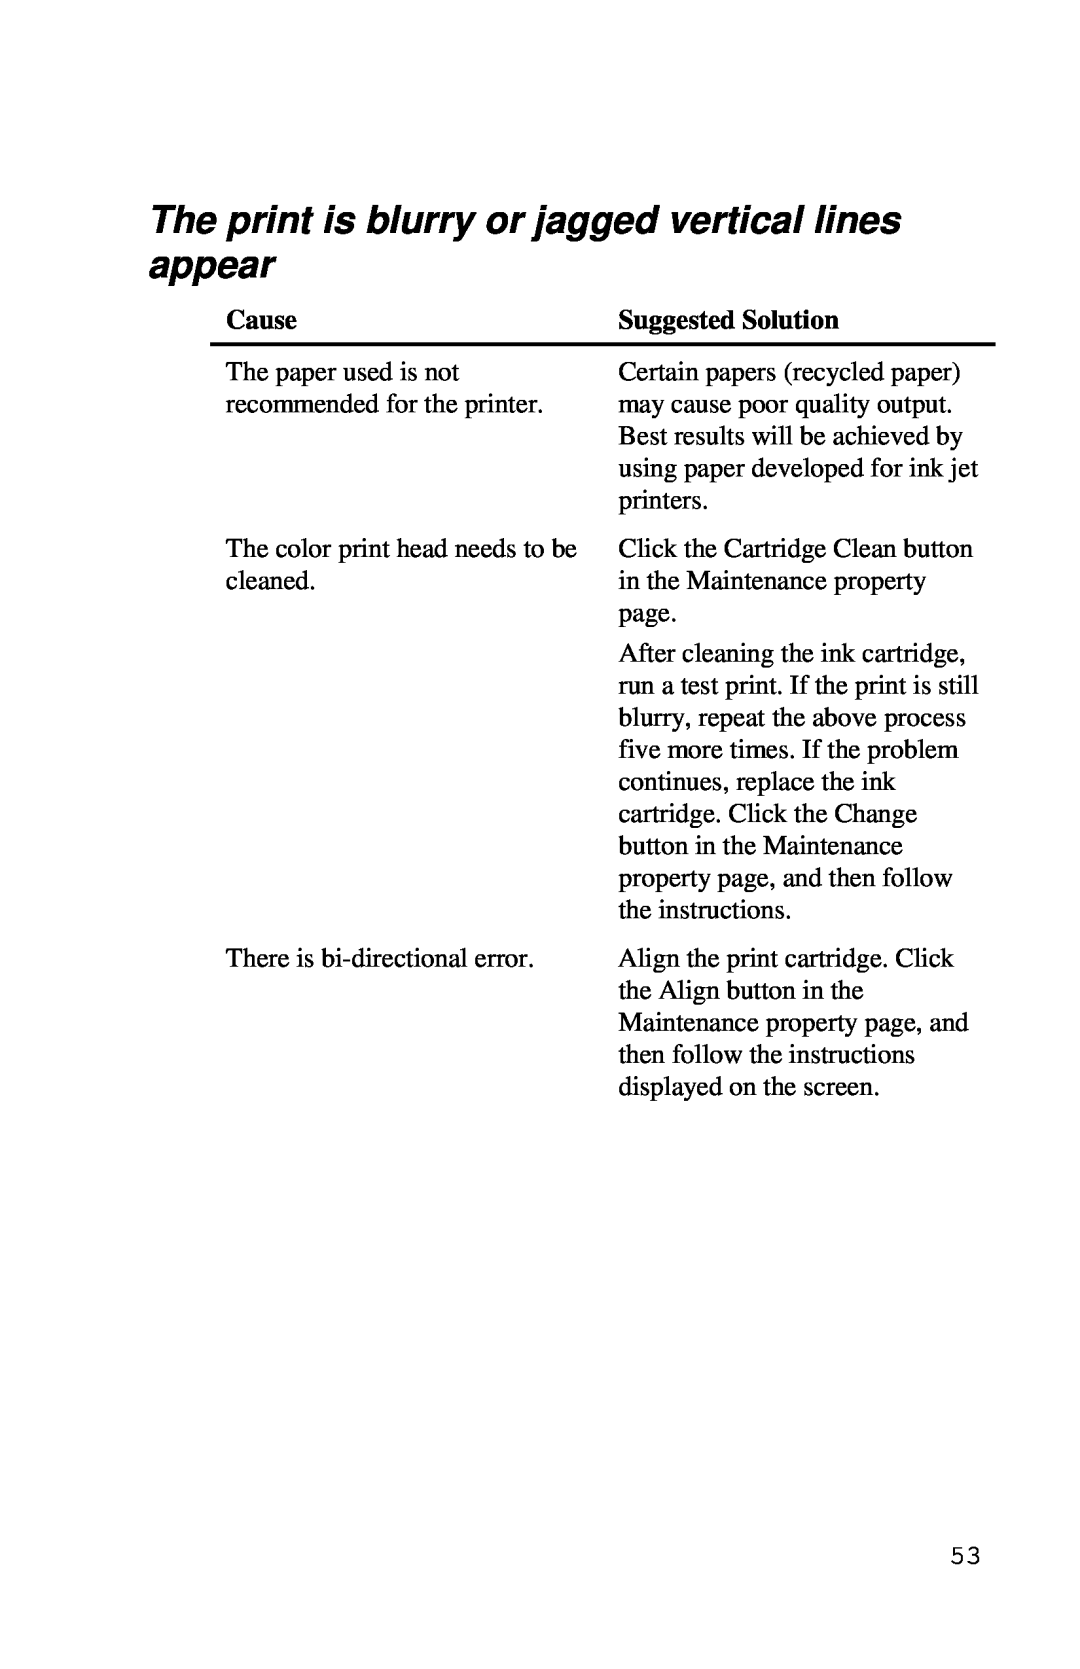 Xerox Inkjet Printer manual Cause, Suggested Solution, The paper used is not recommended for the printer 